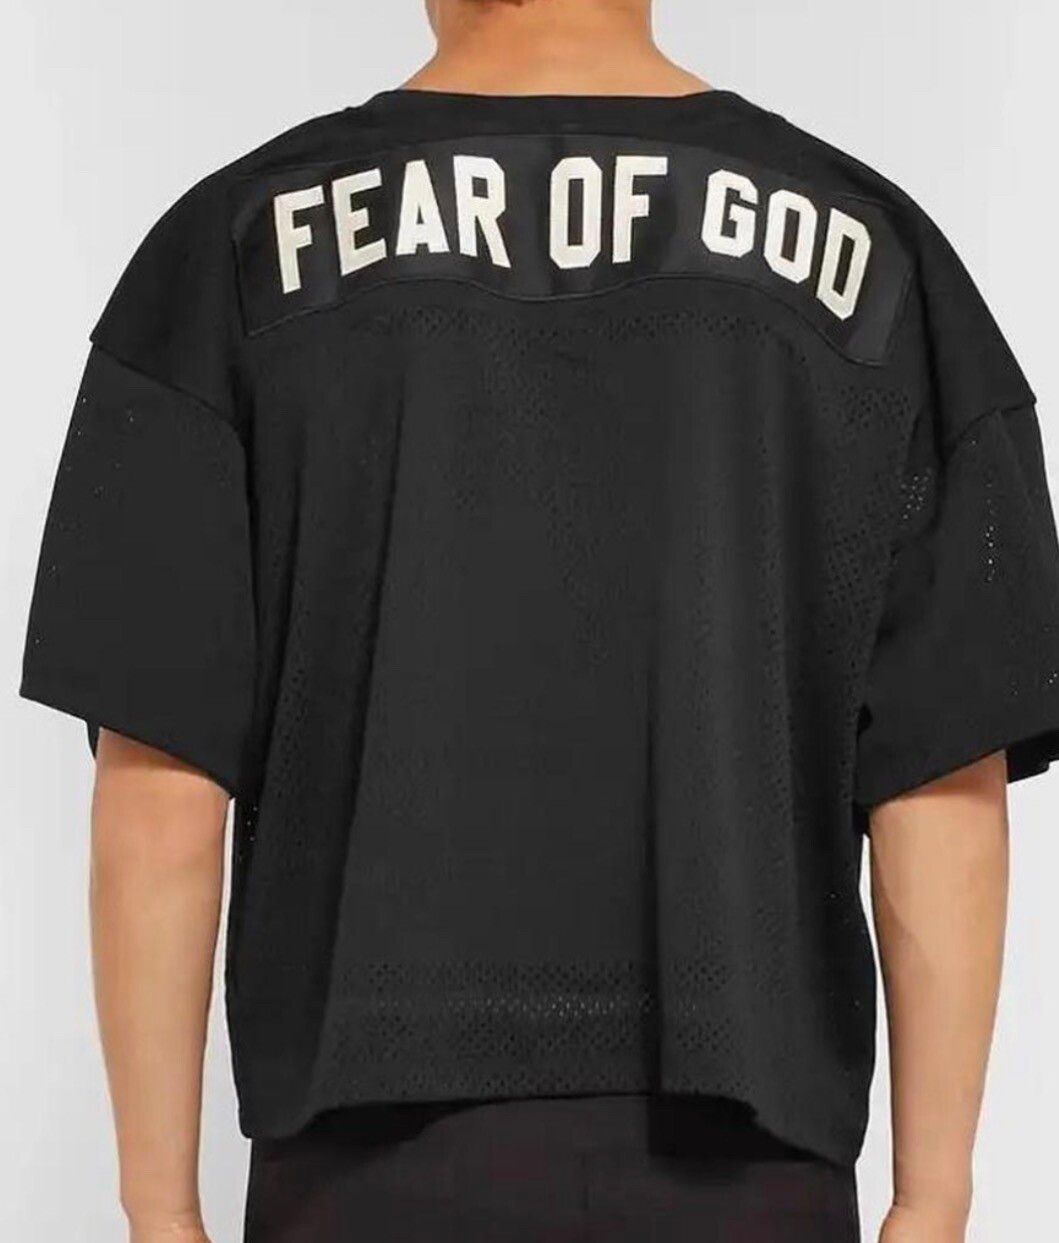 Fear of God FEAR OF GOD 5th collection mesh football jersey | Grailed